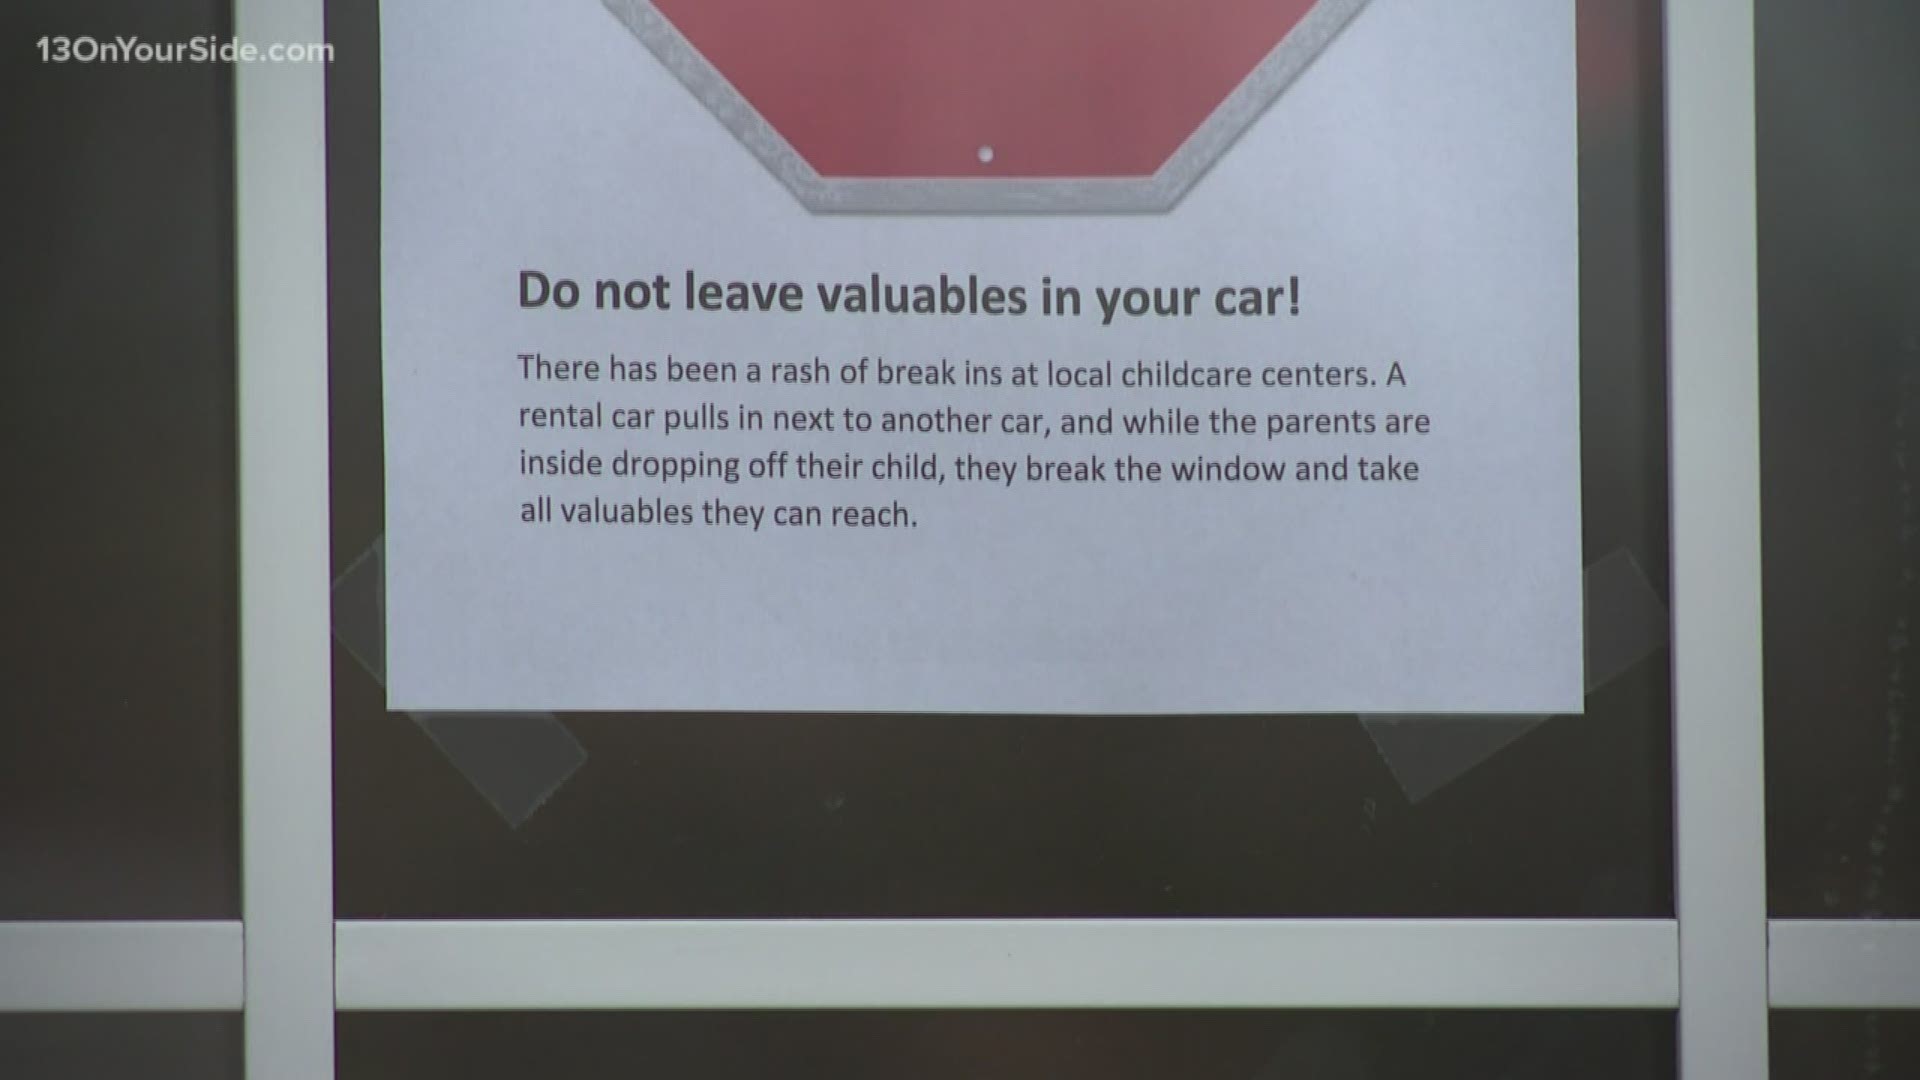 Police are warning parents that thieves are targeting their vehicles as they drop off their kids at daycare.